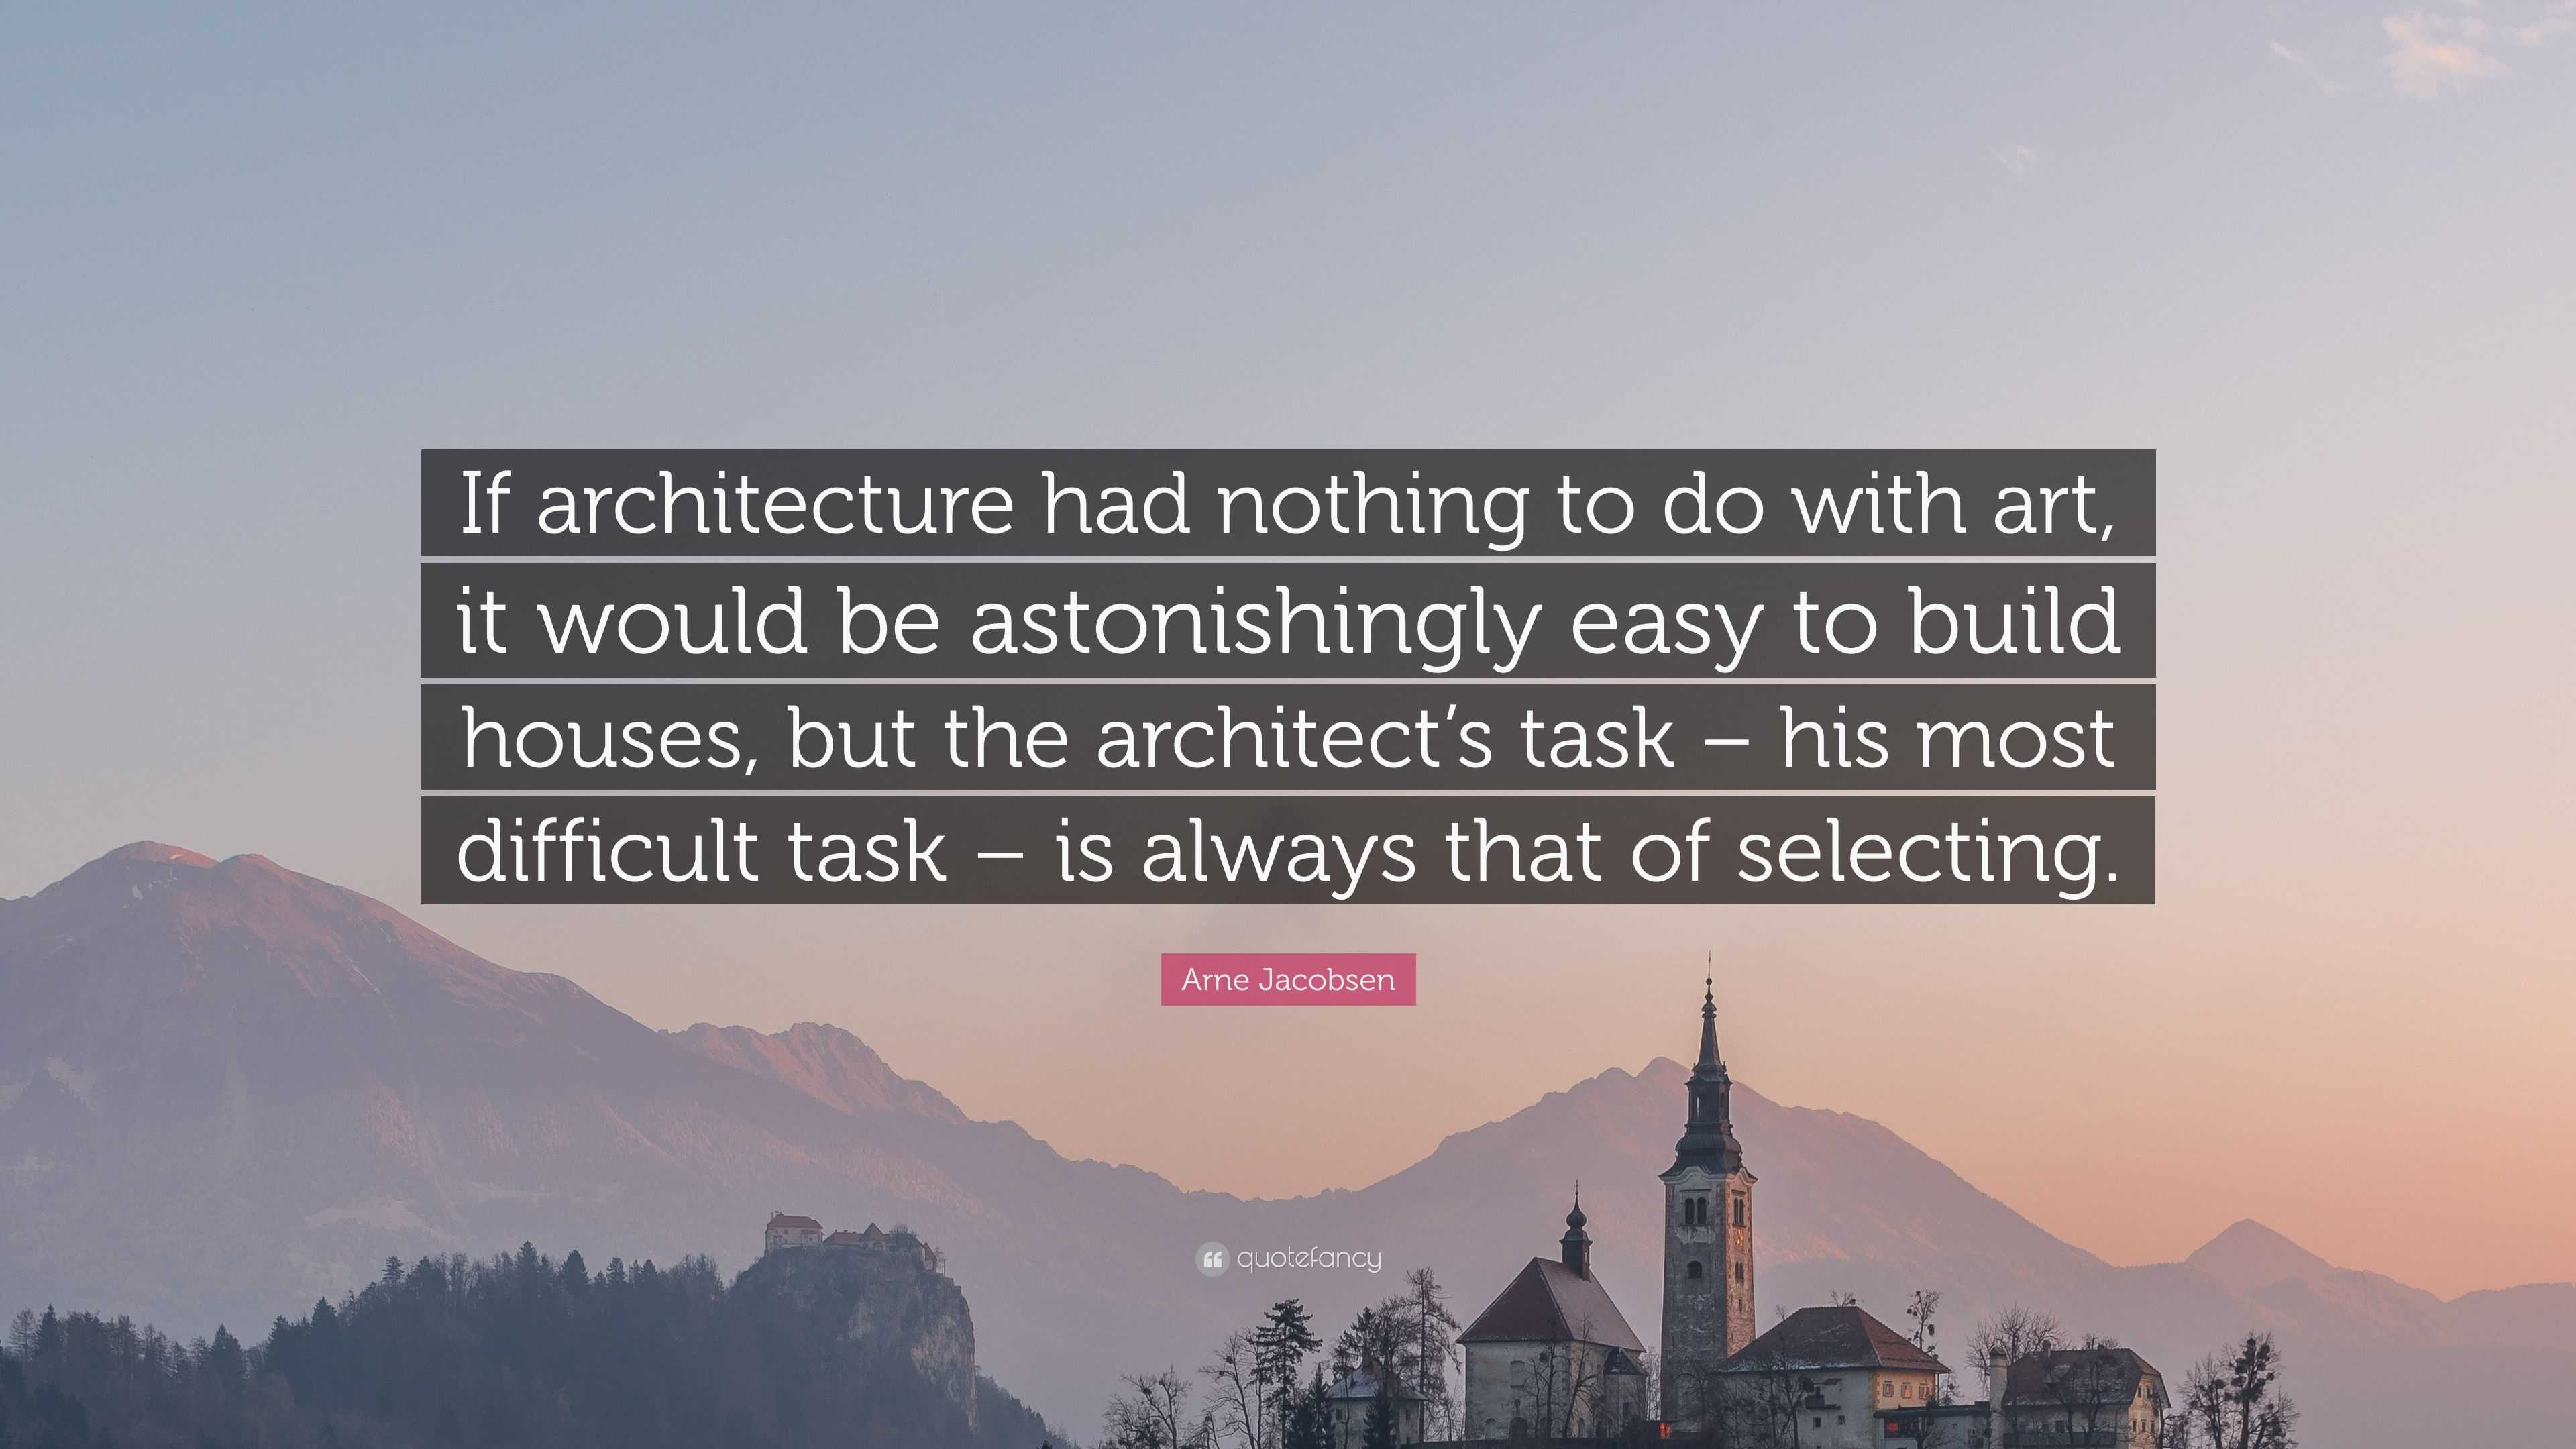 Arne Jacobsen Quote: “If architecture had nothing to do with art, it ...